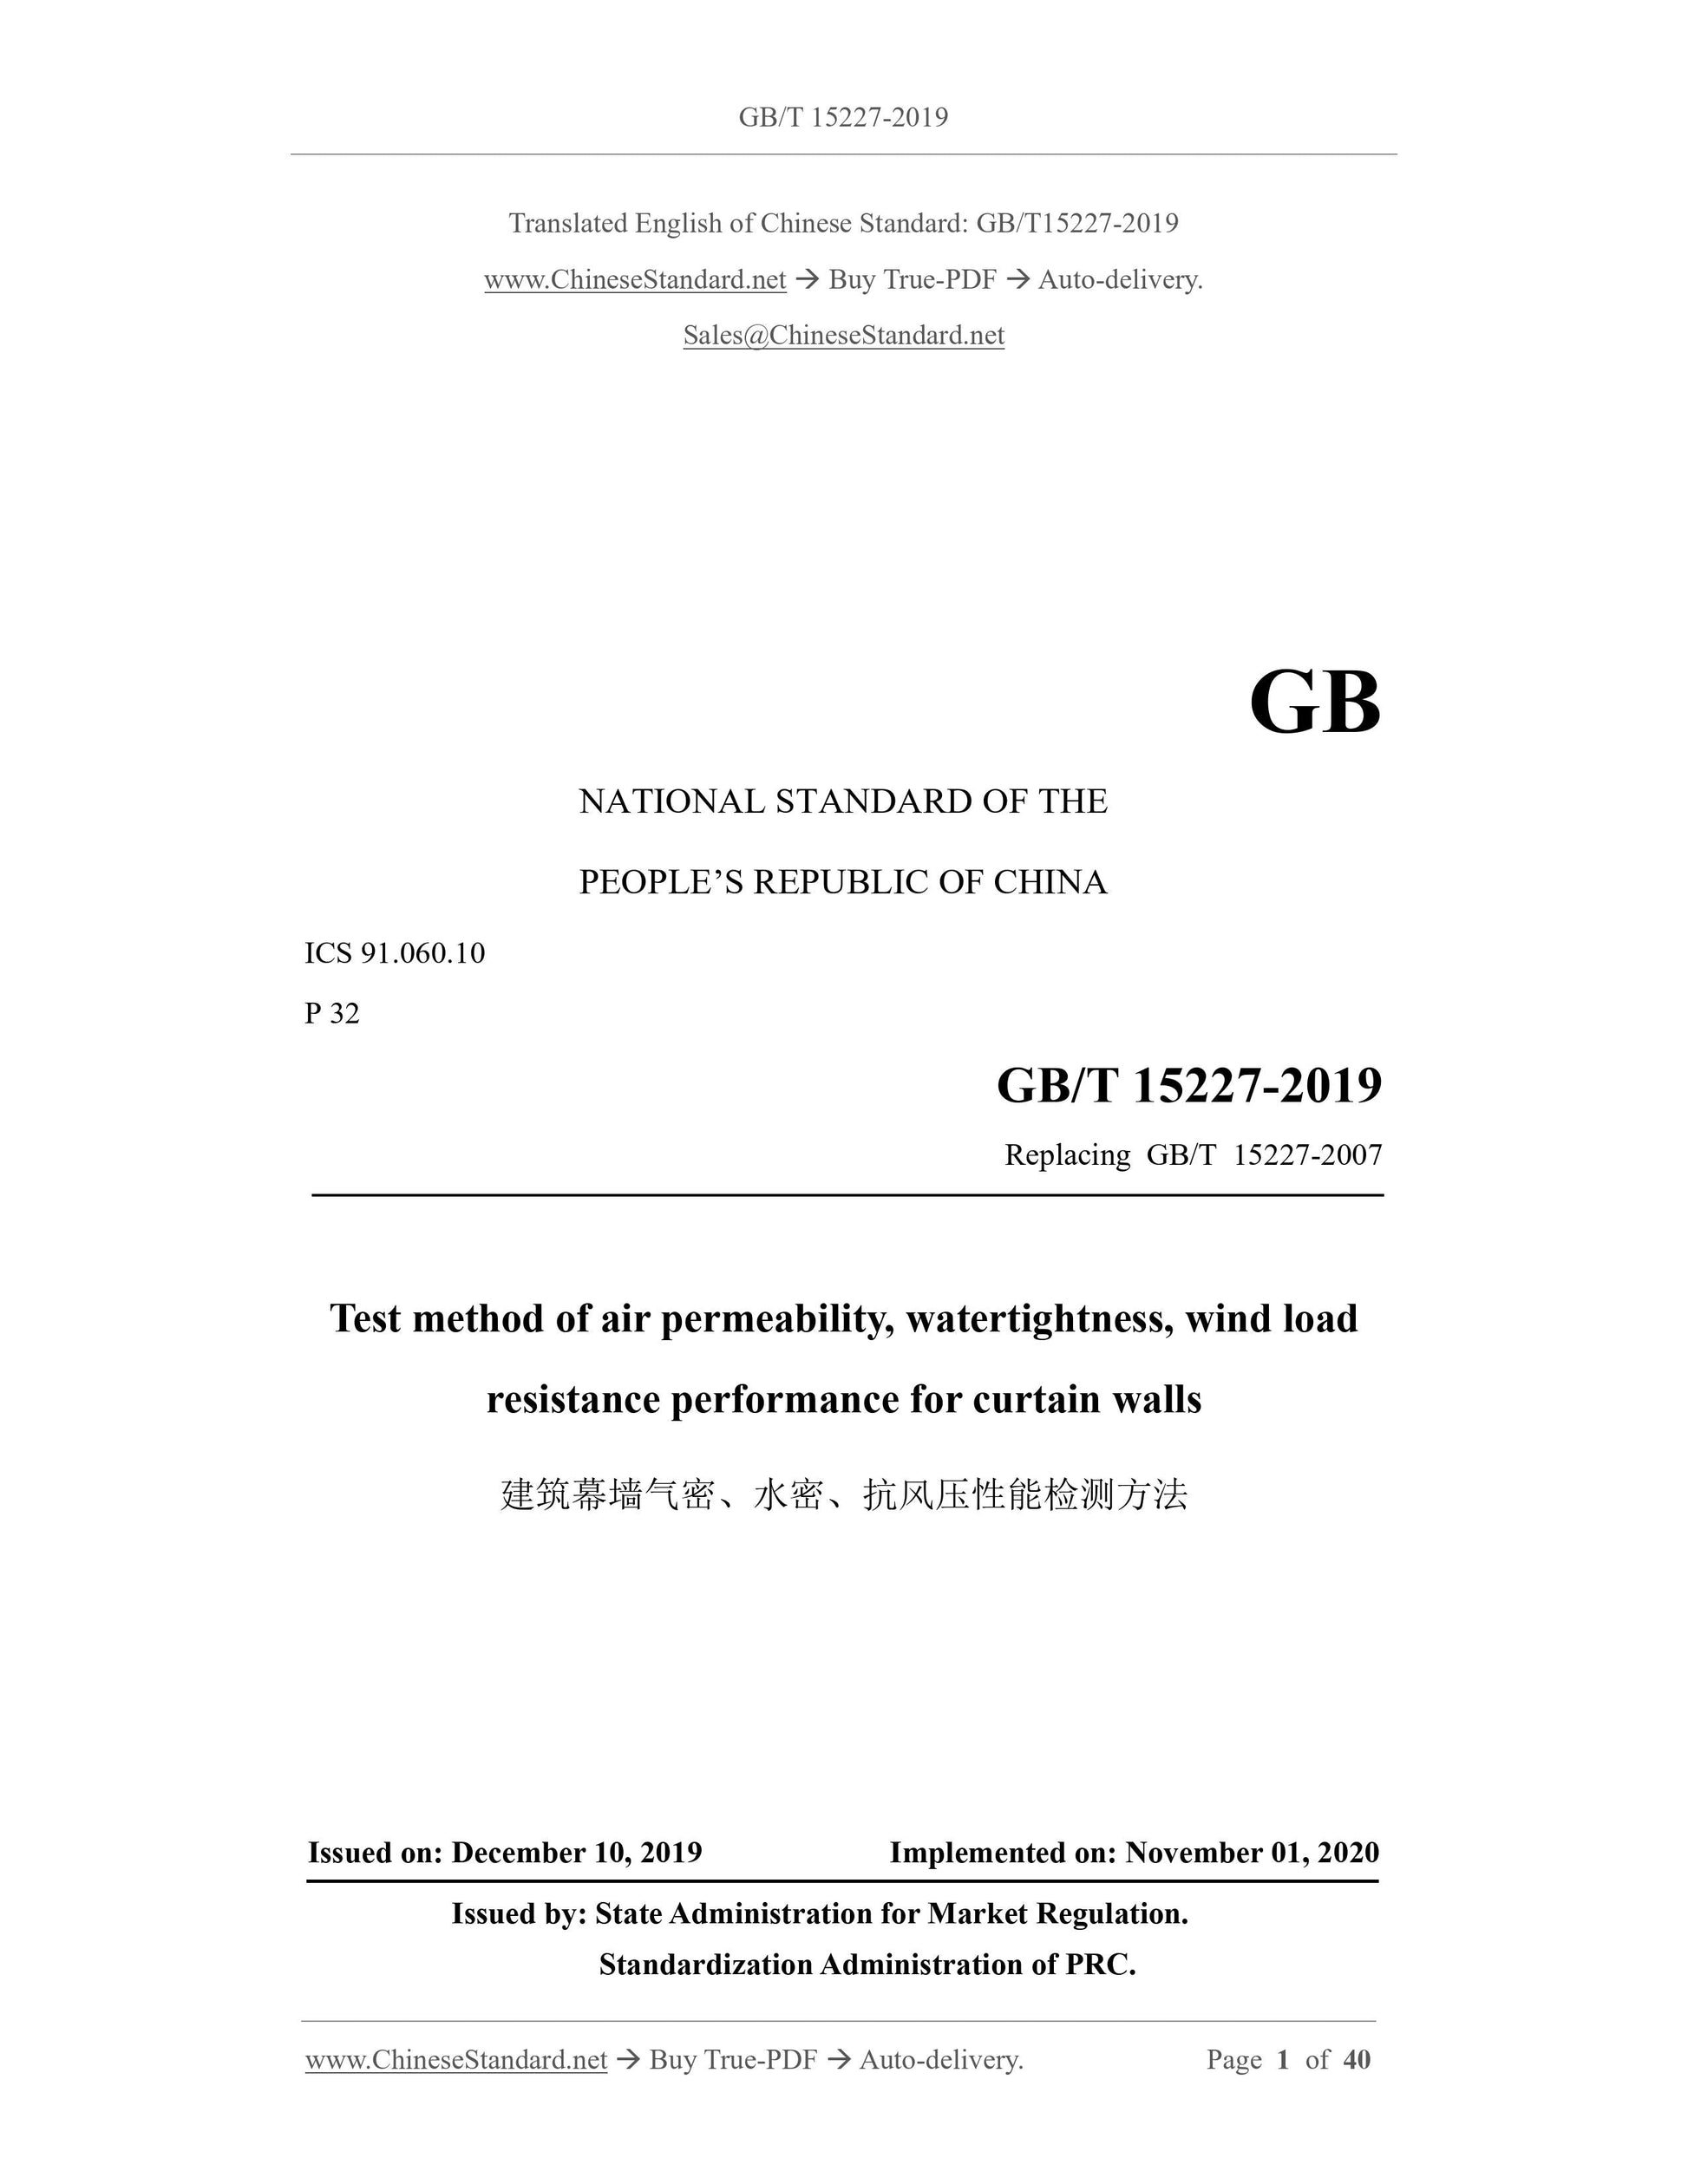 GB/T 15227-2019 Page 1